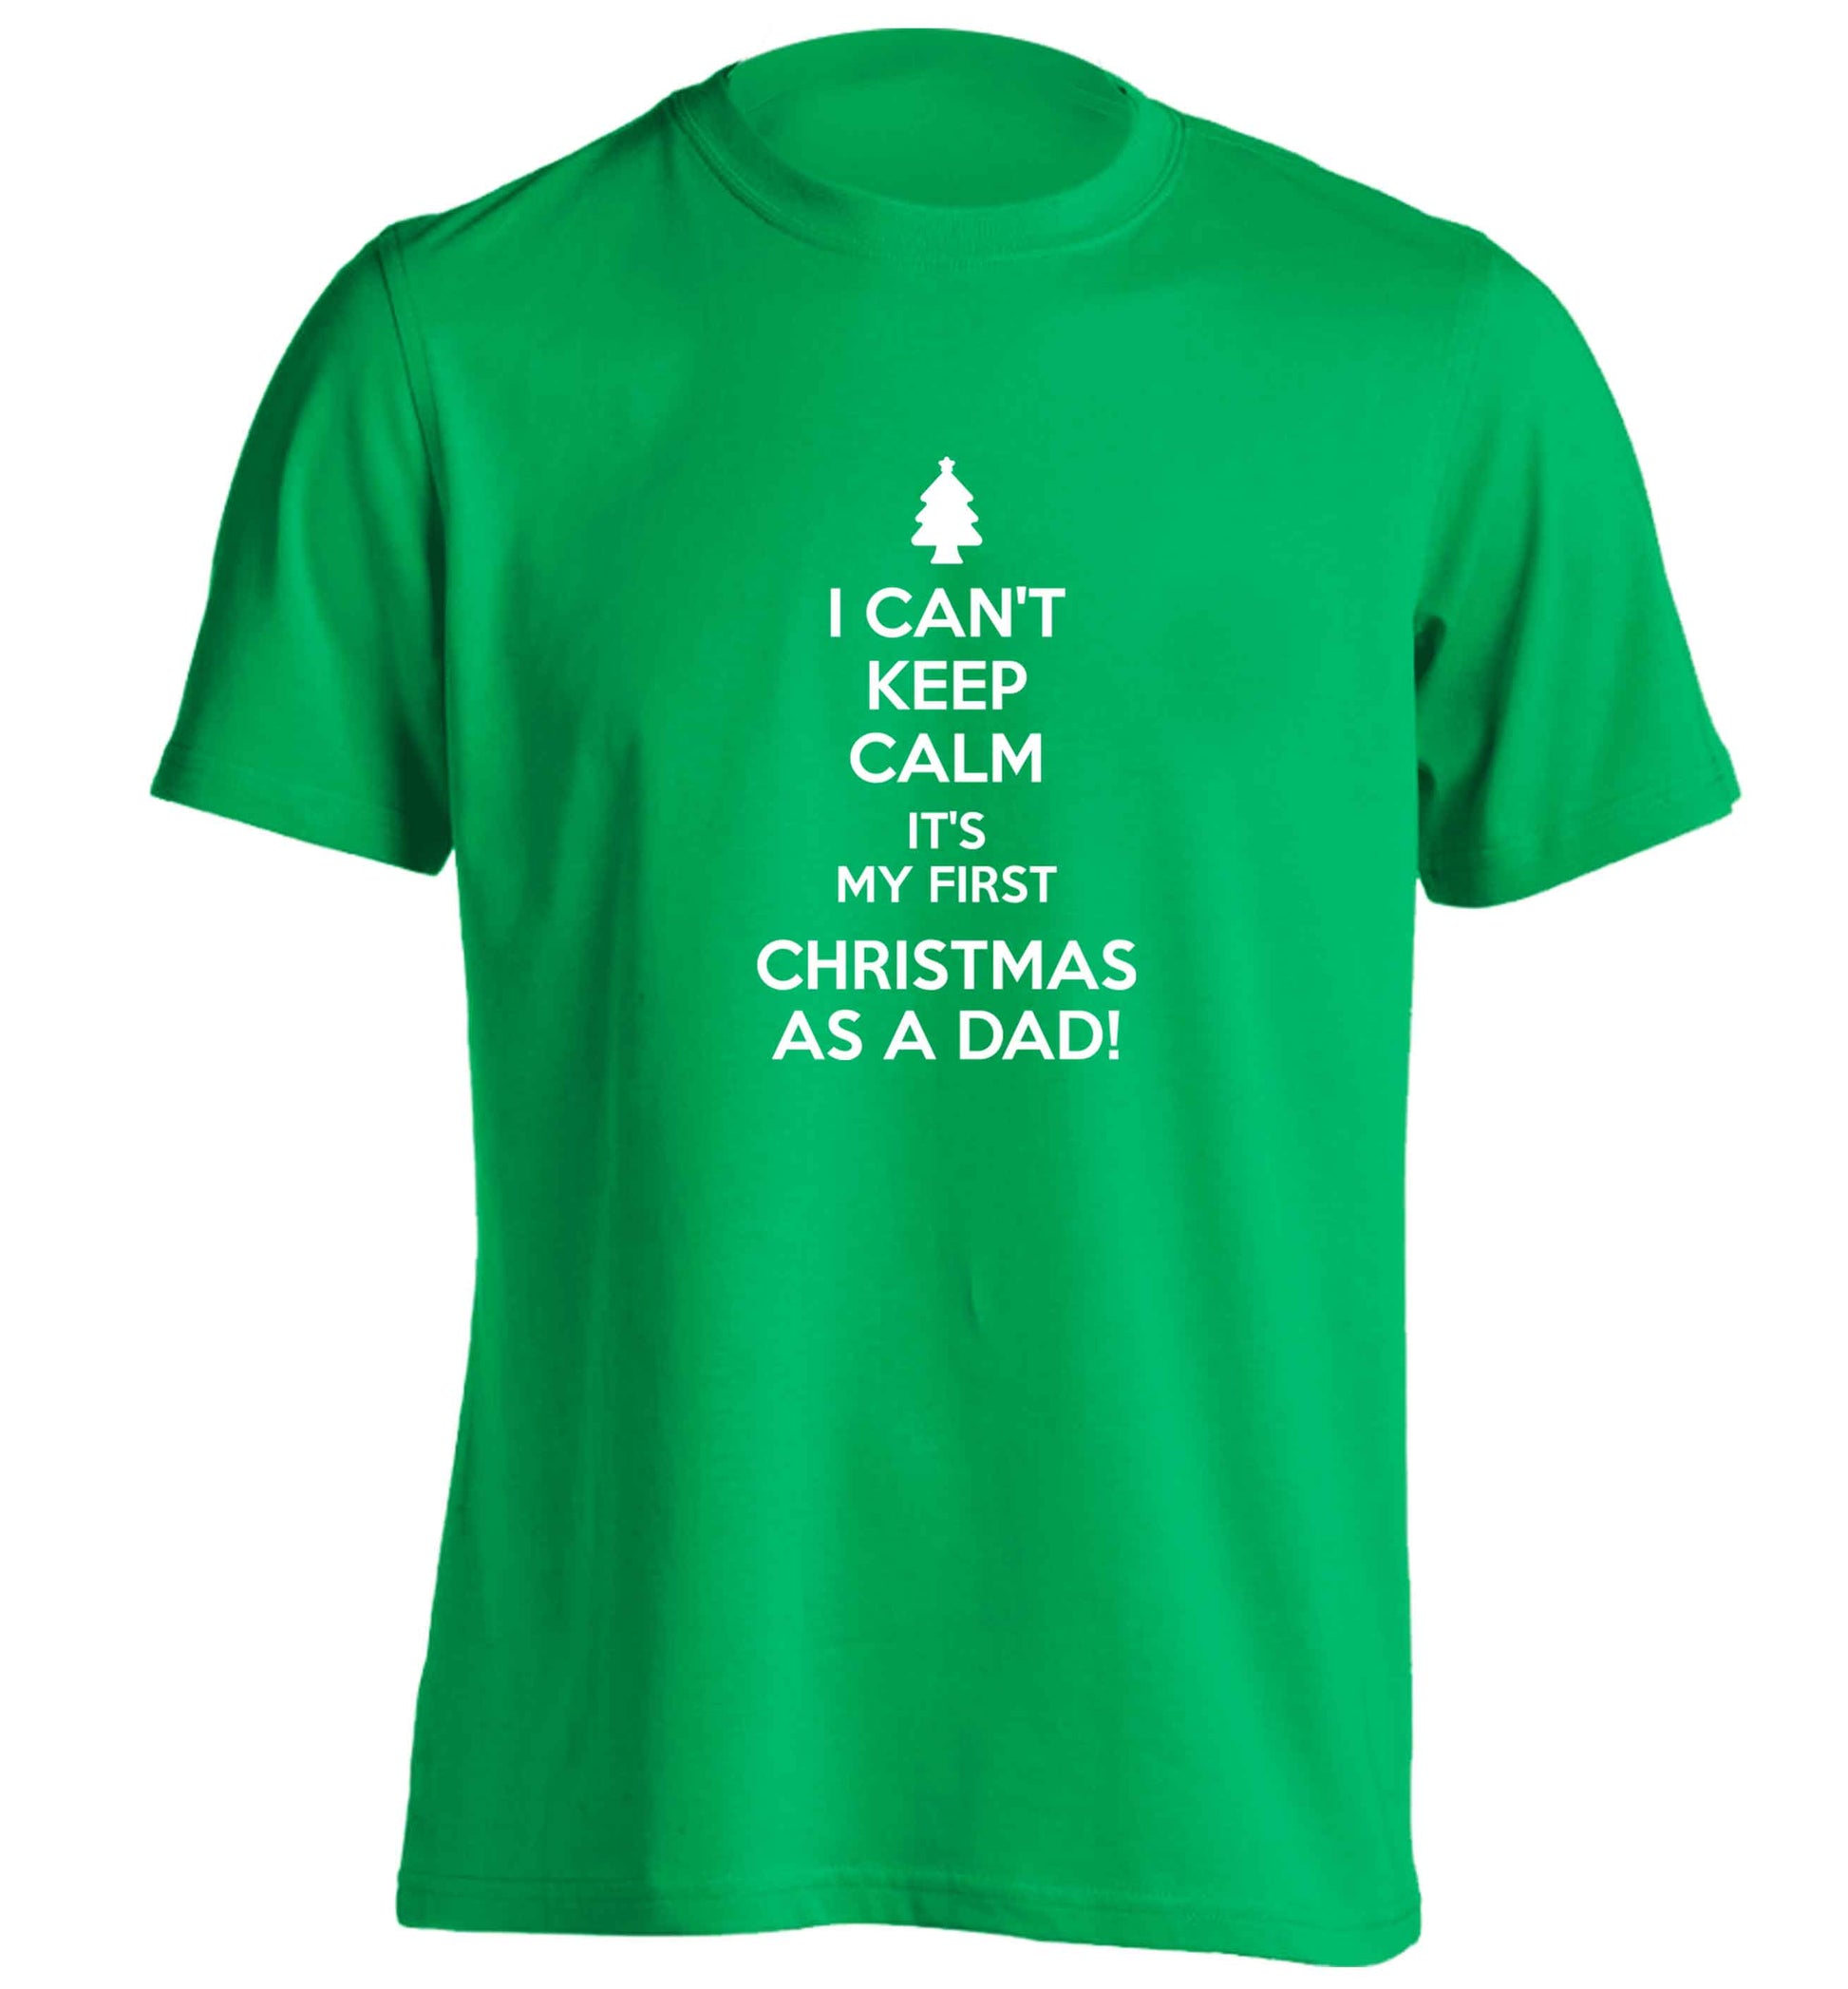 I can't keep calm it's my first Christmas as a dad adults unisex green Tshirt 2XL